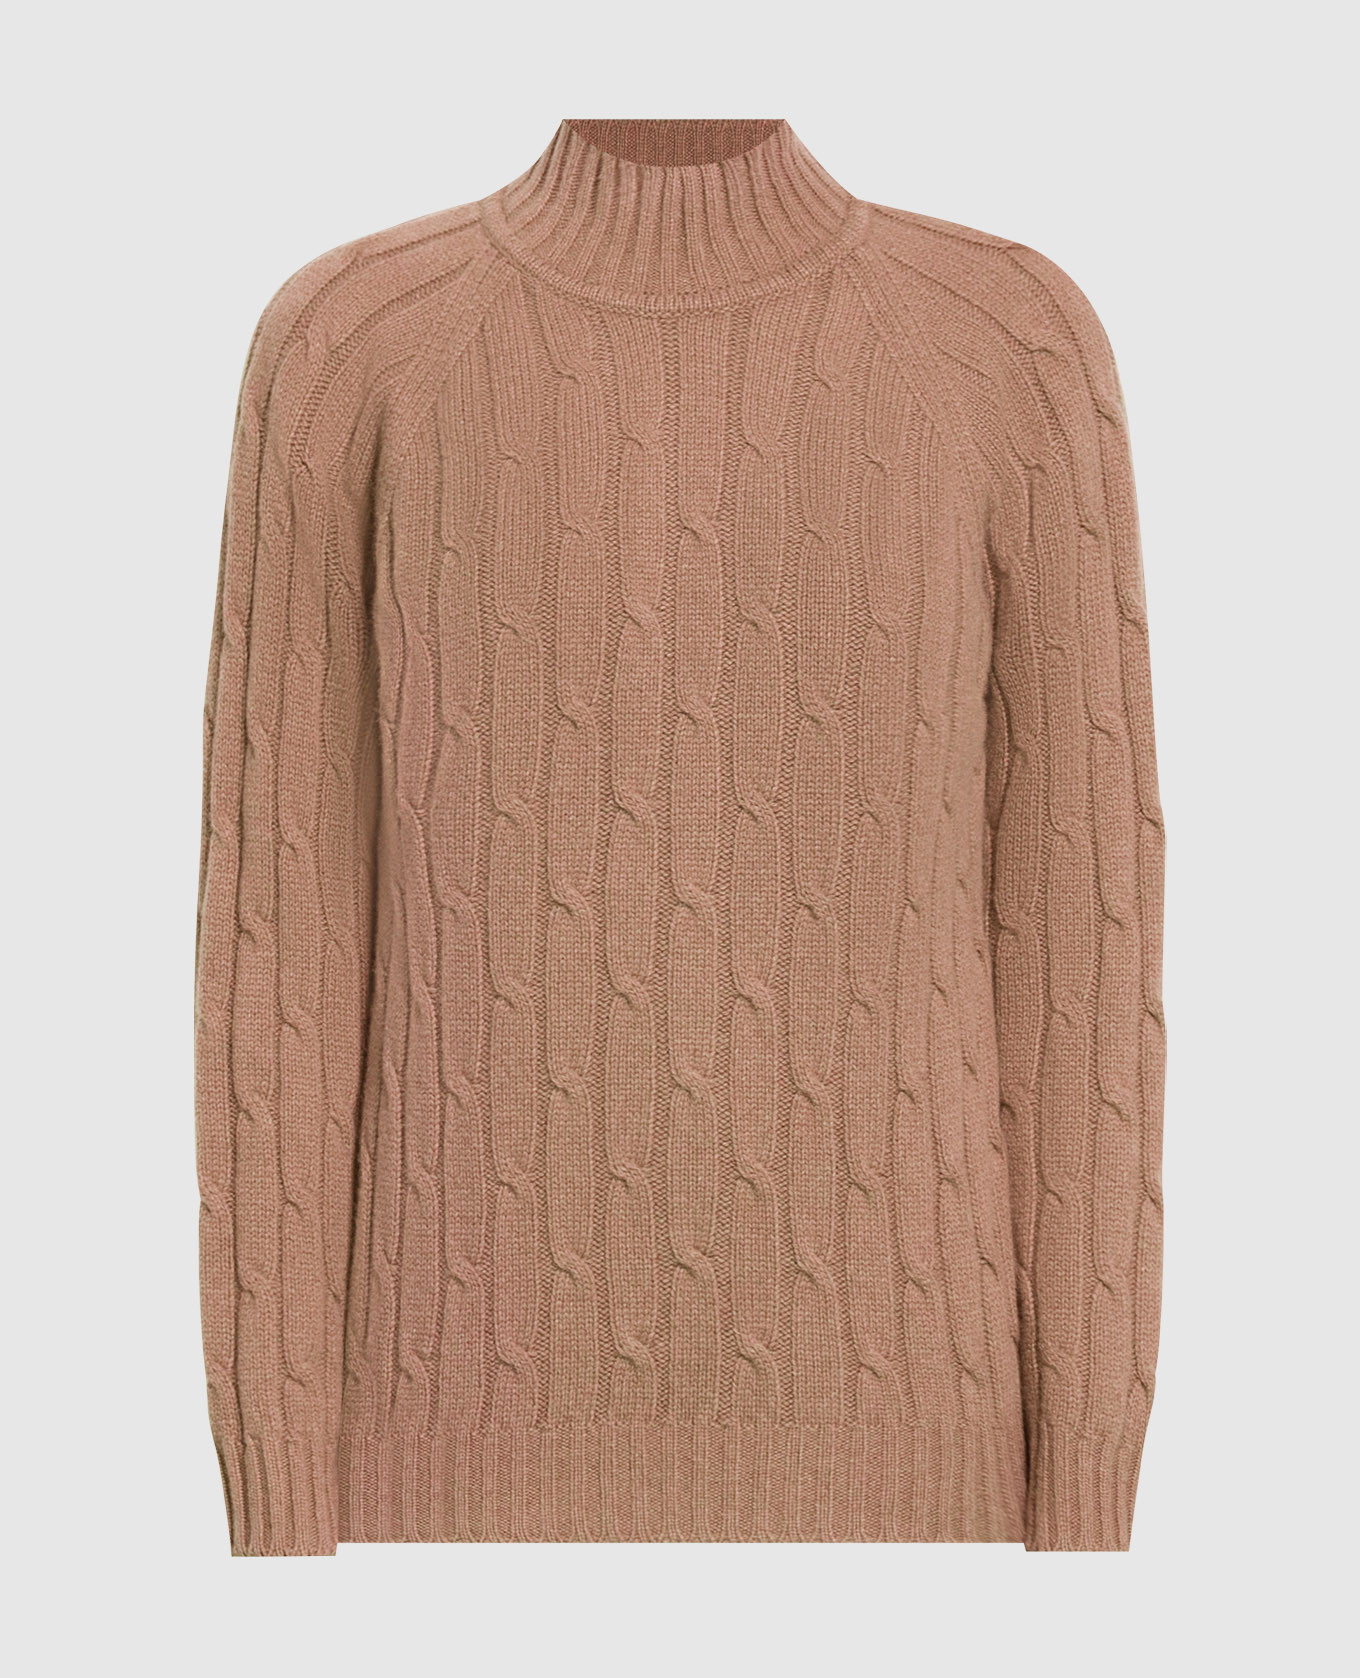 Brown sweater made of cashmere in a textured pattern